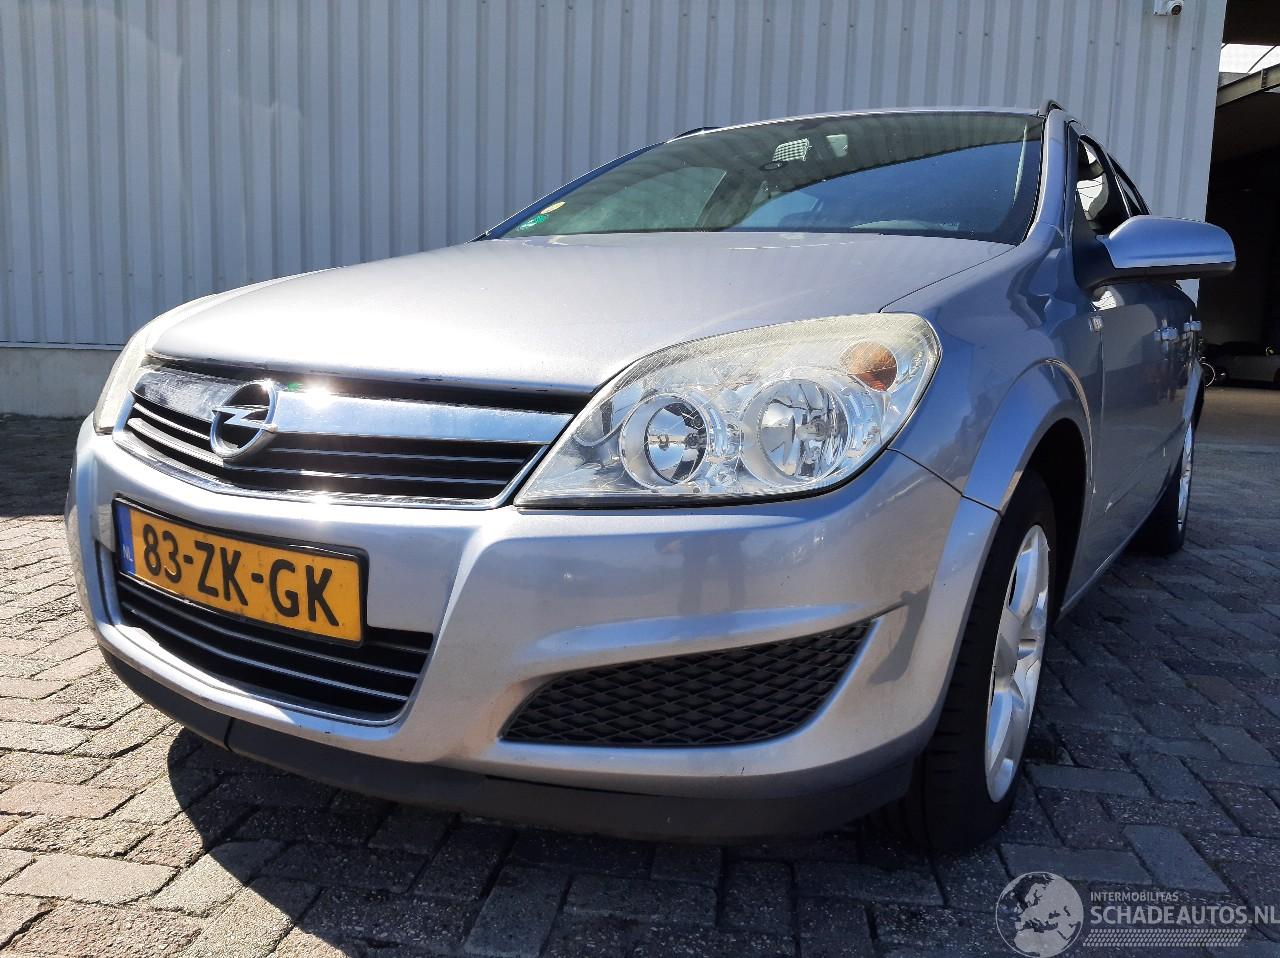 Opel Astra Astra H SW (L35) Combi 1.9 CDTi 16V 150 (Z19DTH(Euro 4)) [110kW]  (09-=
2004/10-2010)